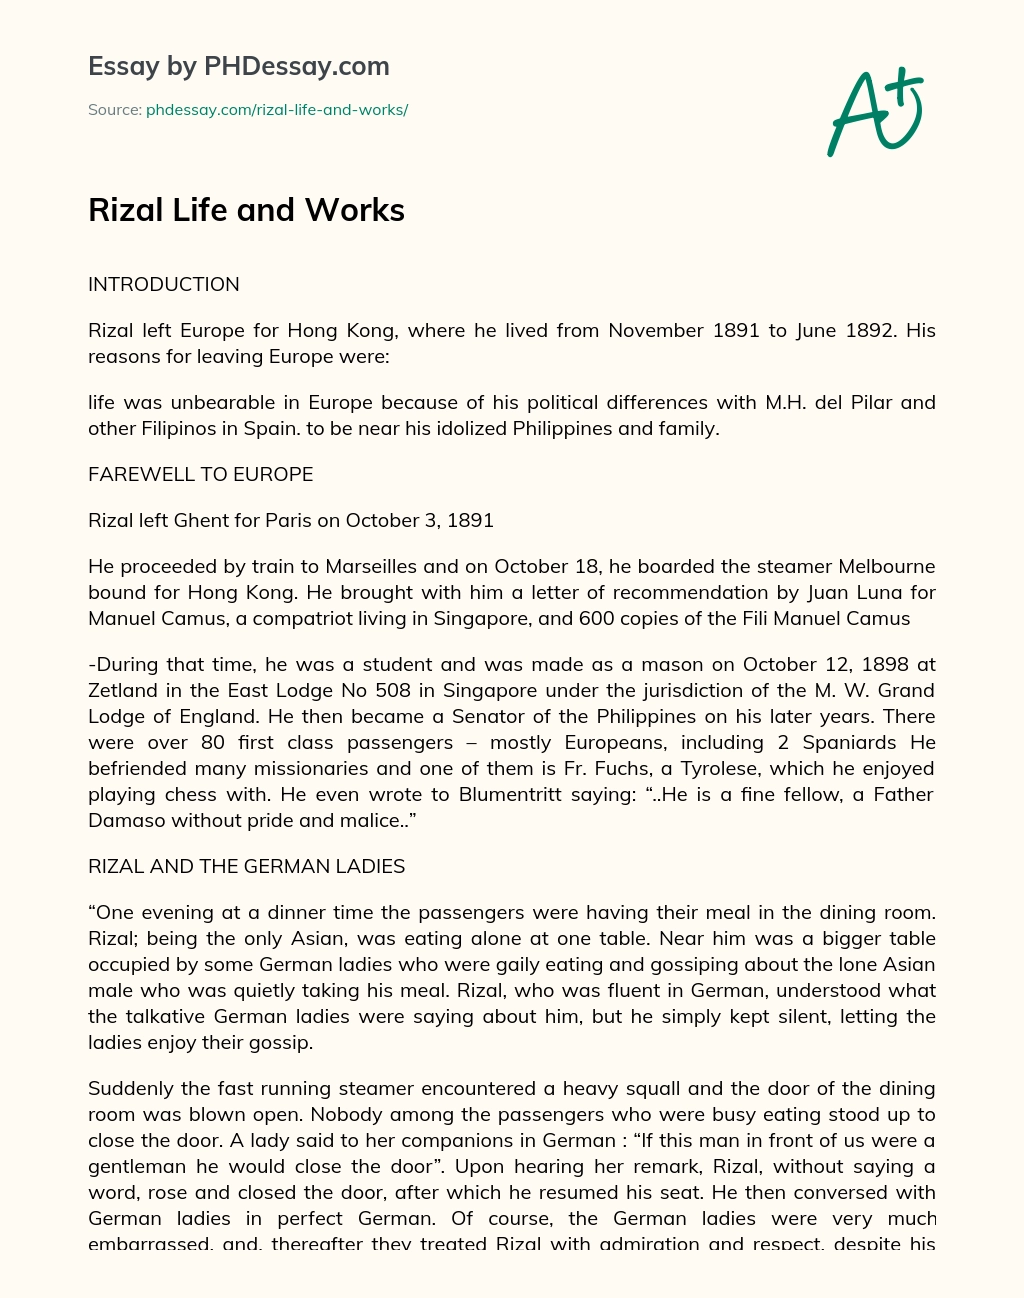 Rizal Life and Works essay